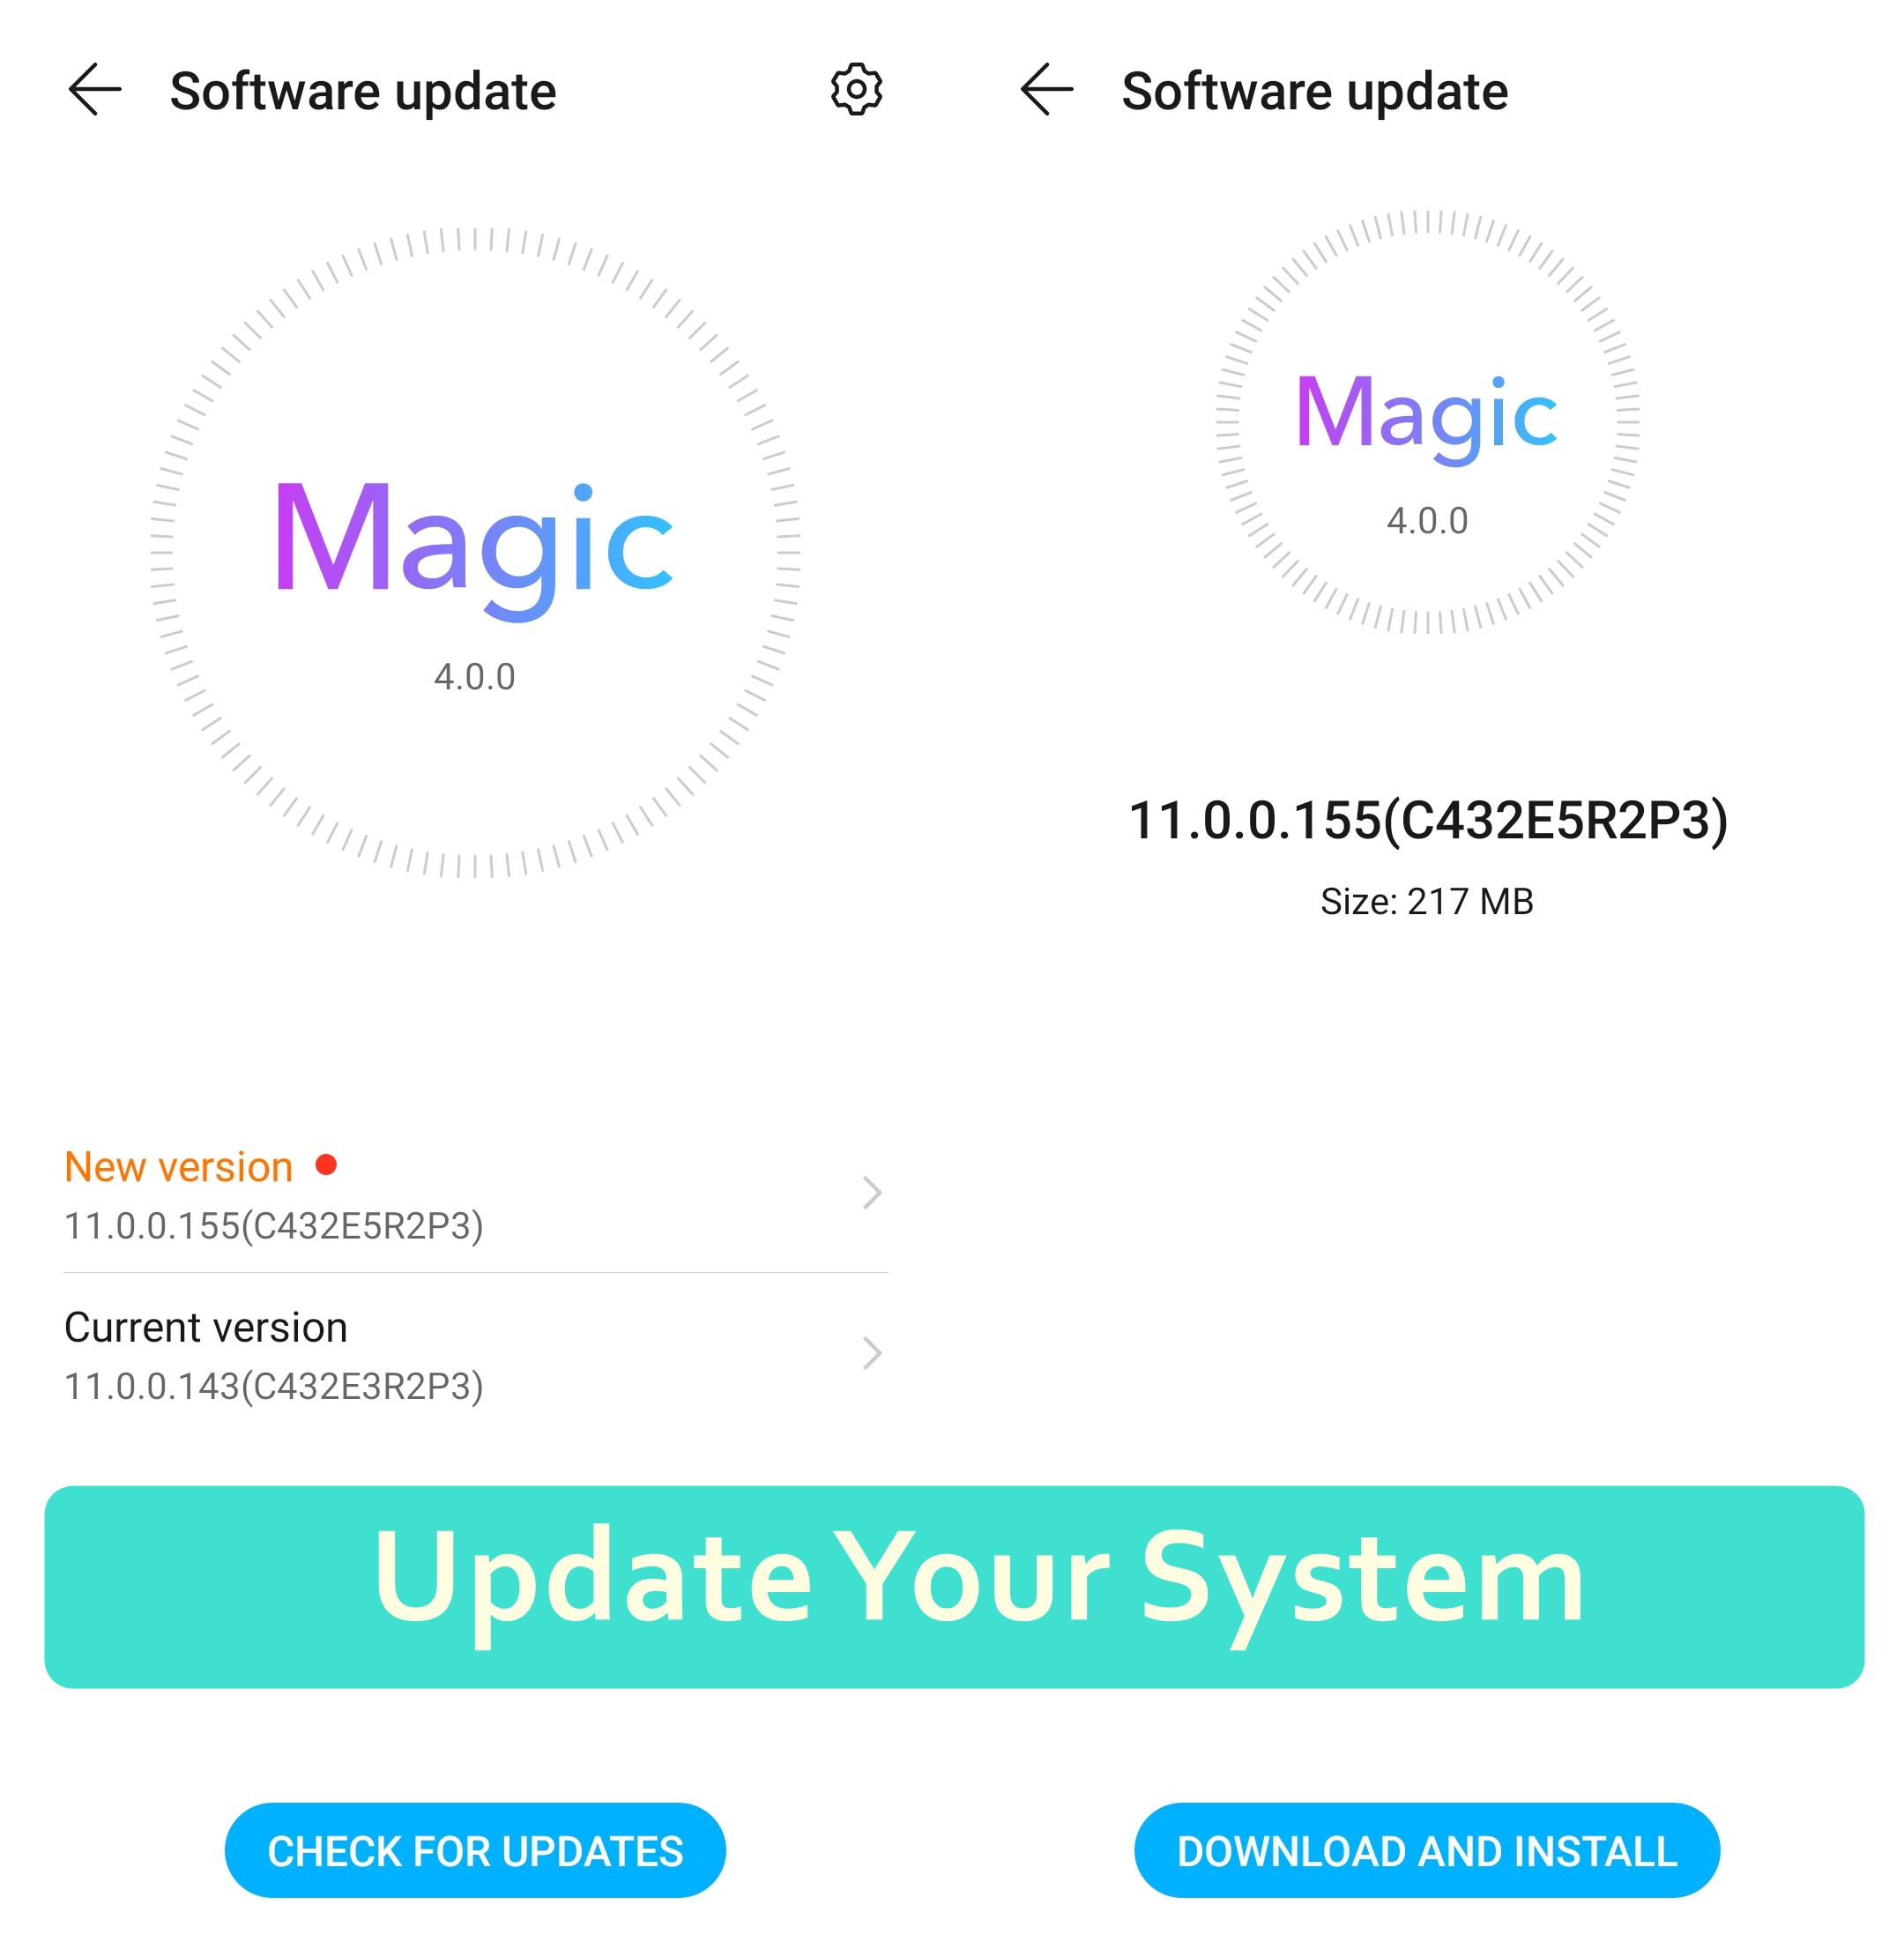 Update Your System